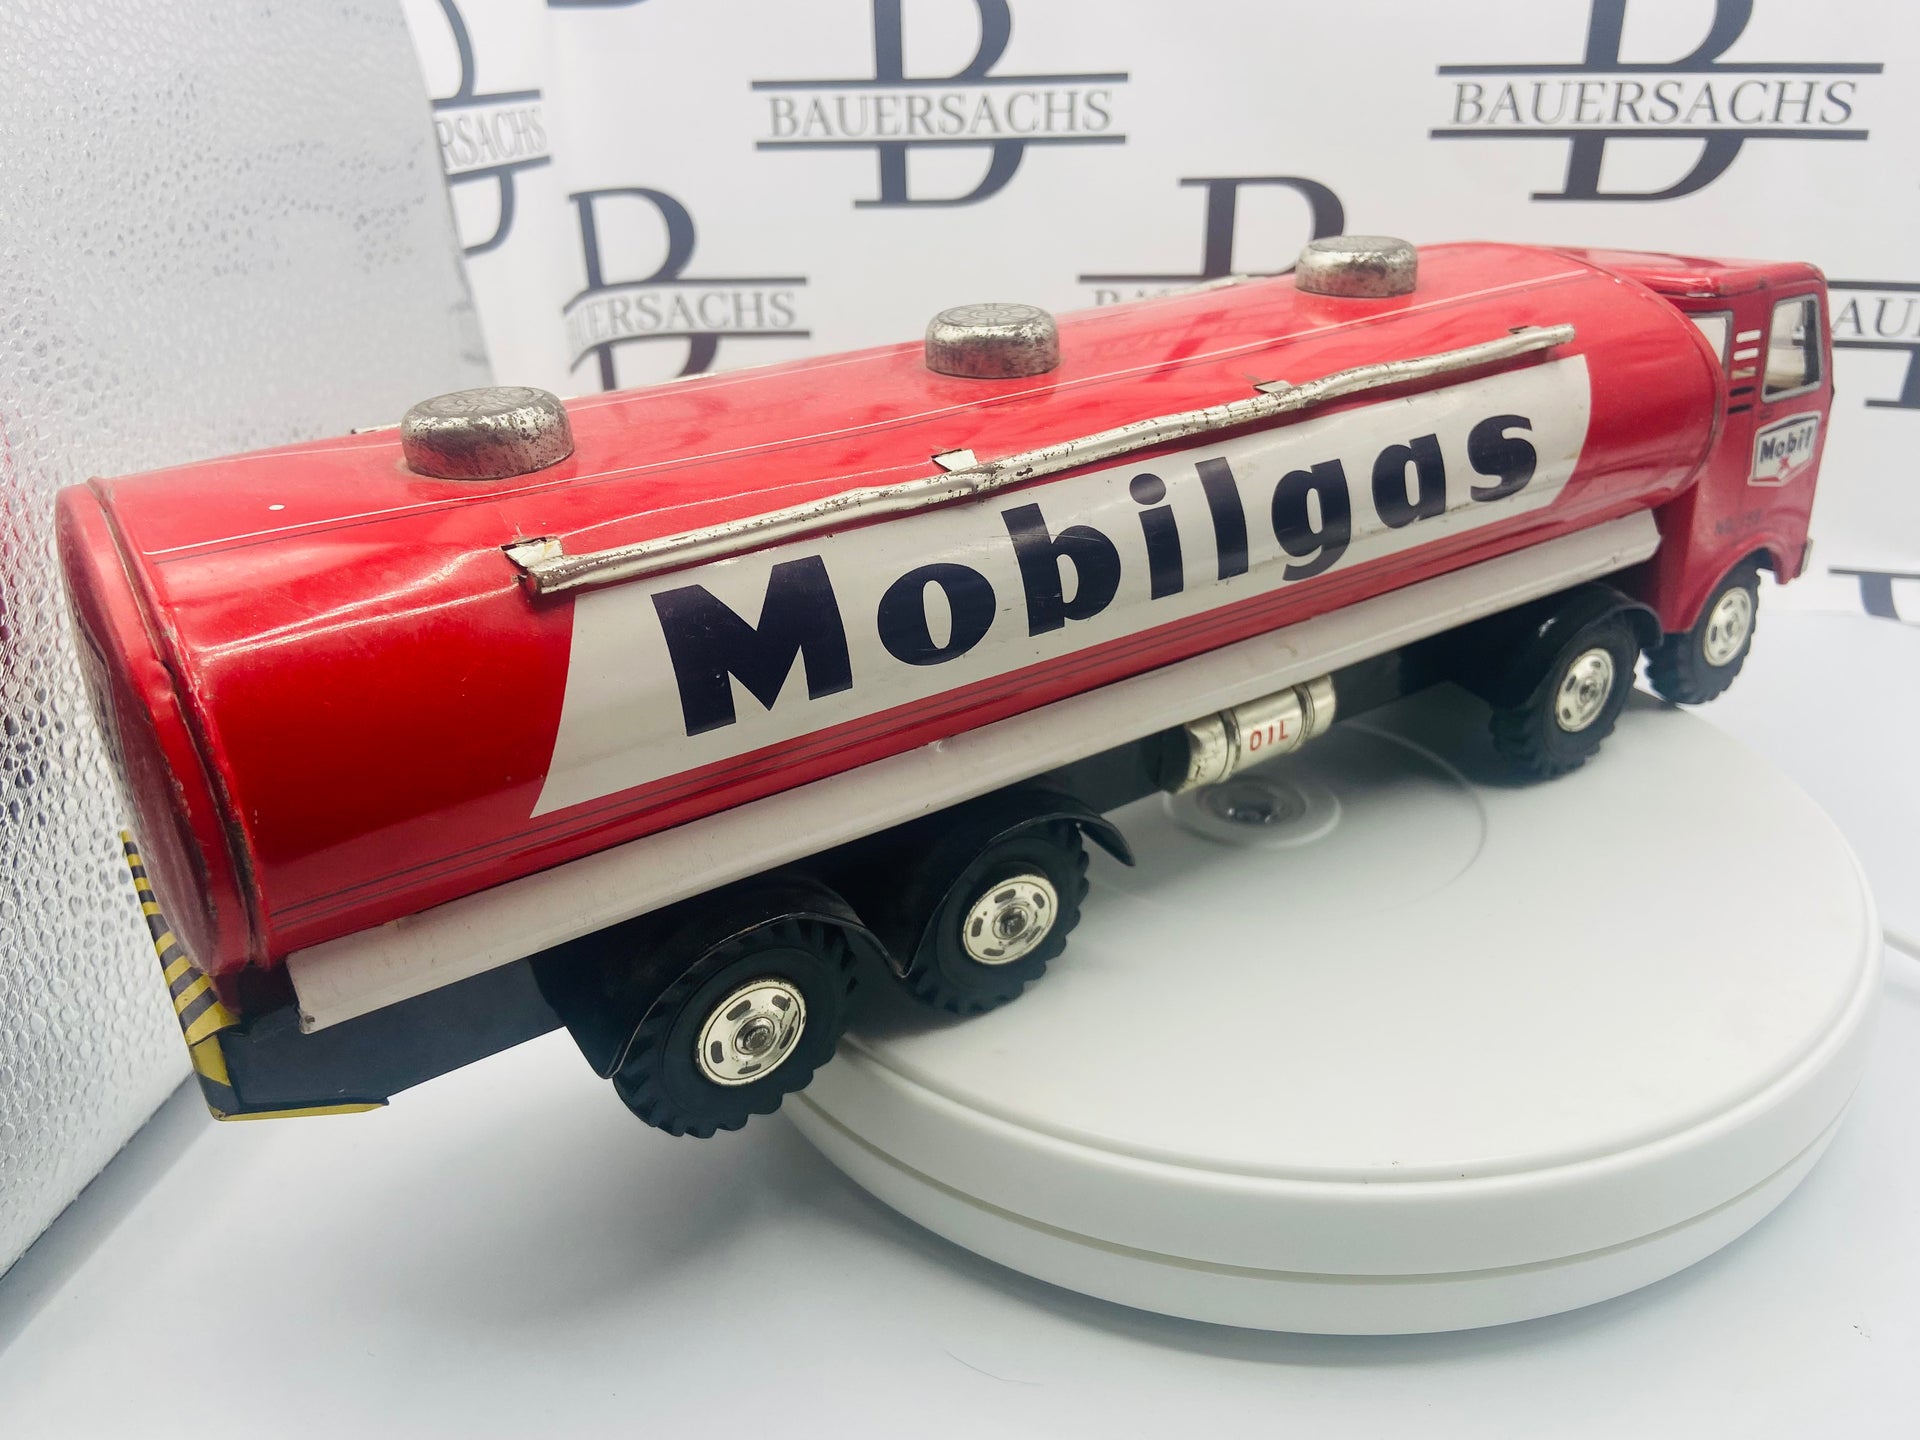 Mobile Gas Pressed Steel Toy Truck 1960s Bauersachs’ Timeless Toys